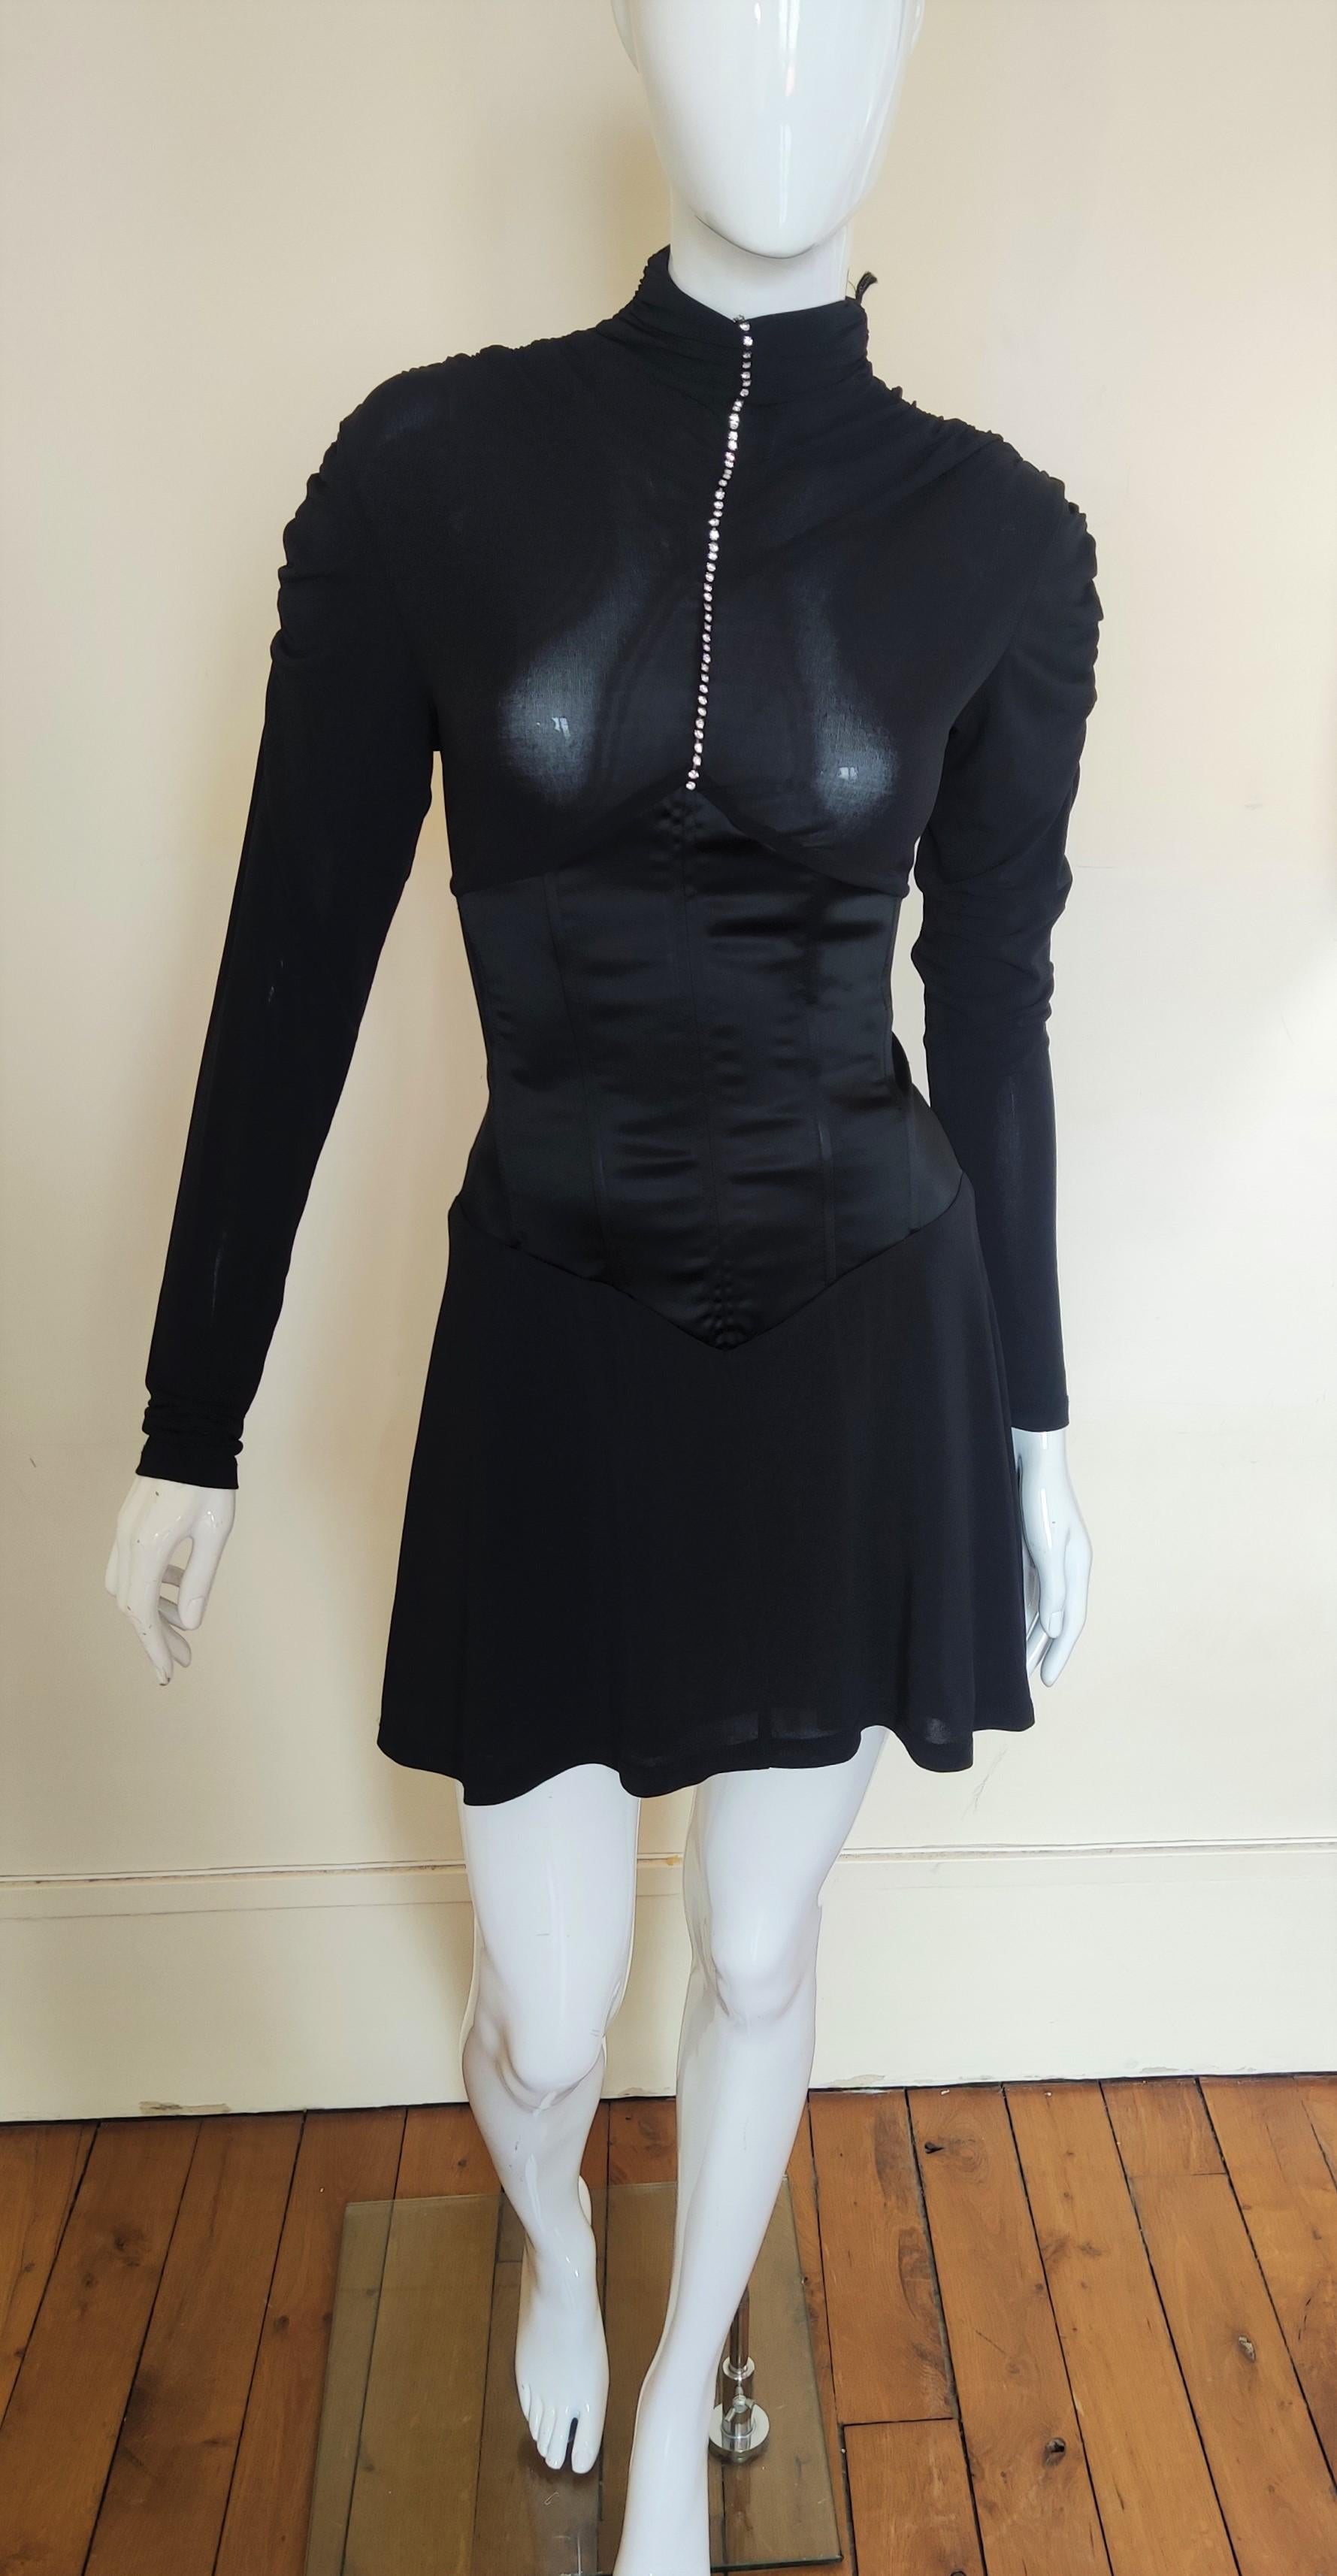 Alexander McQueen Swaorwski dress.
With 53 Swarovski stones. 
Extra high turtleneck.
Corset at the waist. 
Semi transparent at the top and the sleeves. 
New with Tag!

SIZE
Medium. Marked size: IT44. 
Stretchy fabric!
Length: 80 cm / 31.5 inch
Bust: